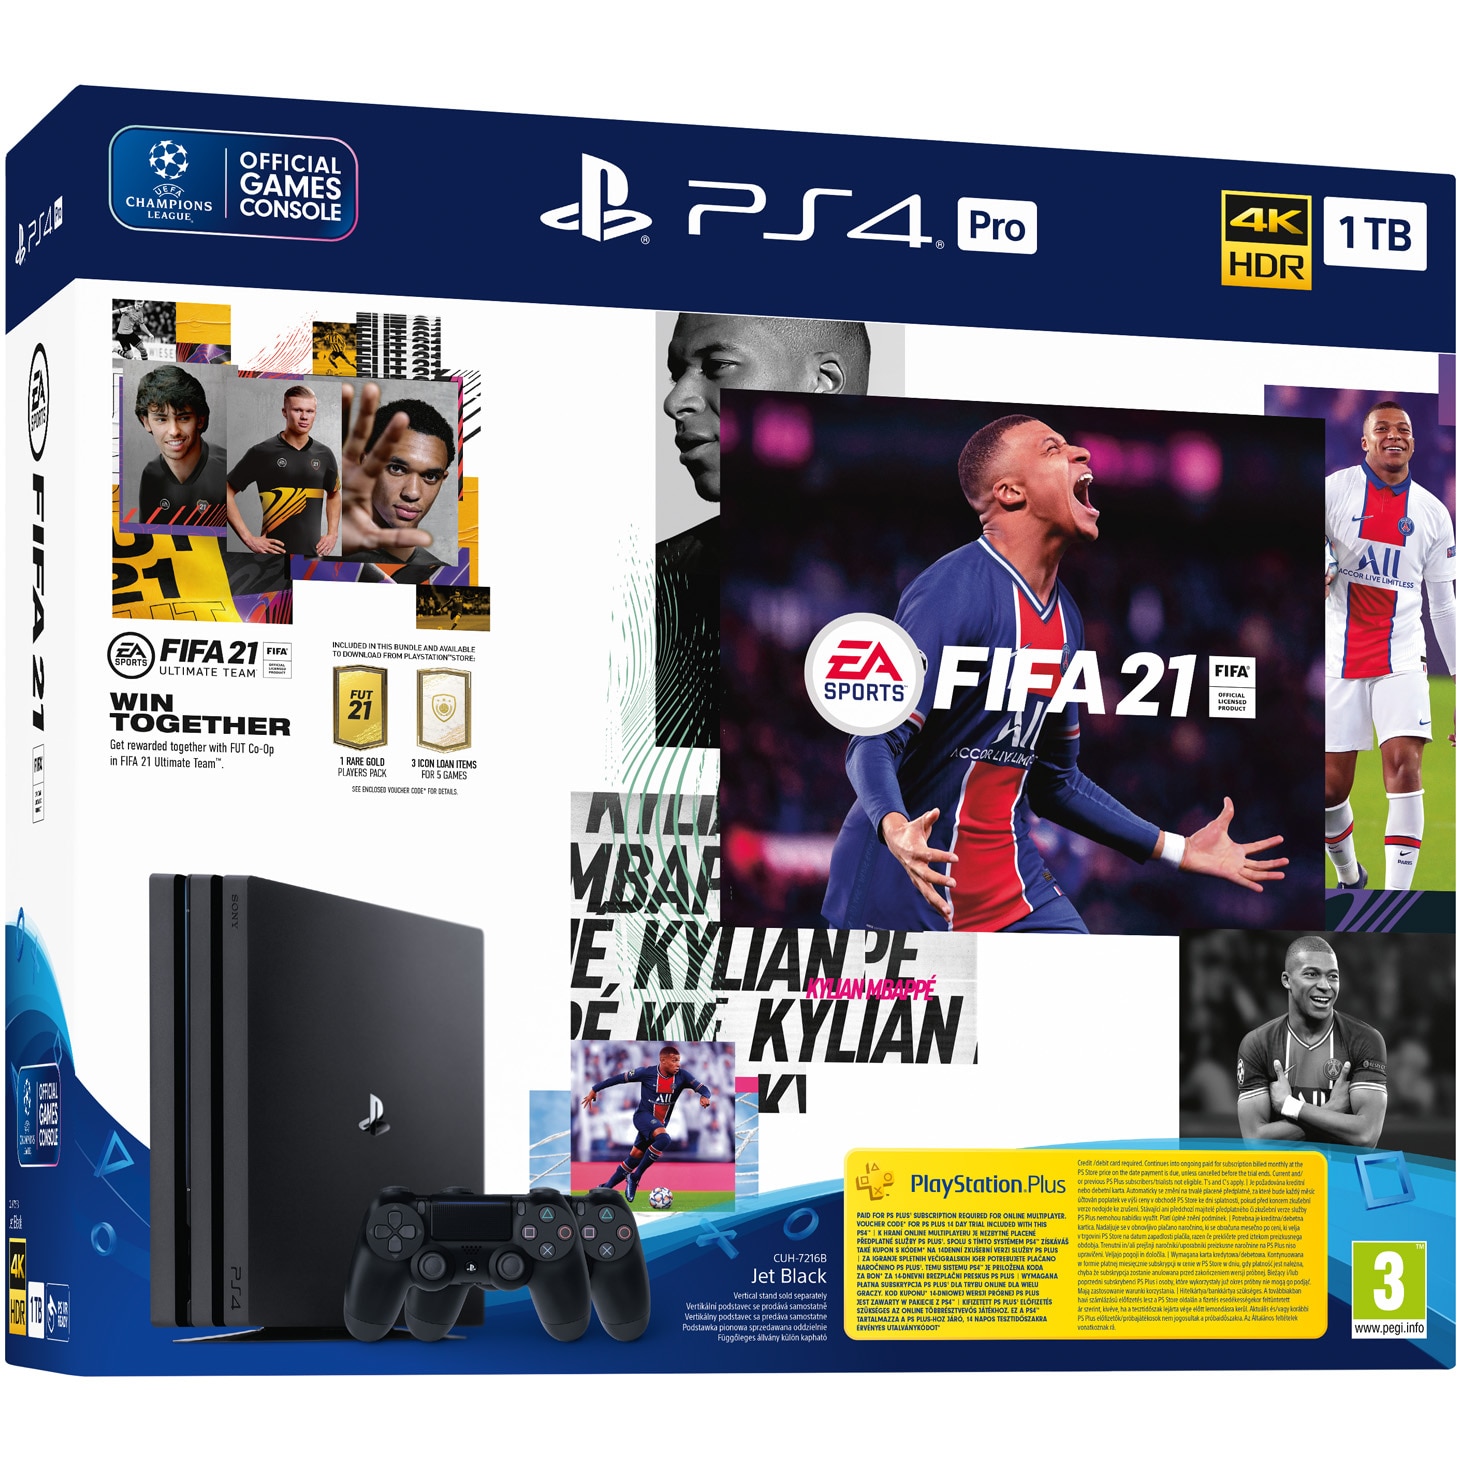 Proof Bible By the way Consola SONY PlayStation 4 Pro, 1TB, Jet Black + extra controller DualShock  4 + joc FIFA 21+ PSPlus 14 zile + voucher FIFA 21 Ultimate Team - eMAG.ro